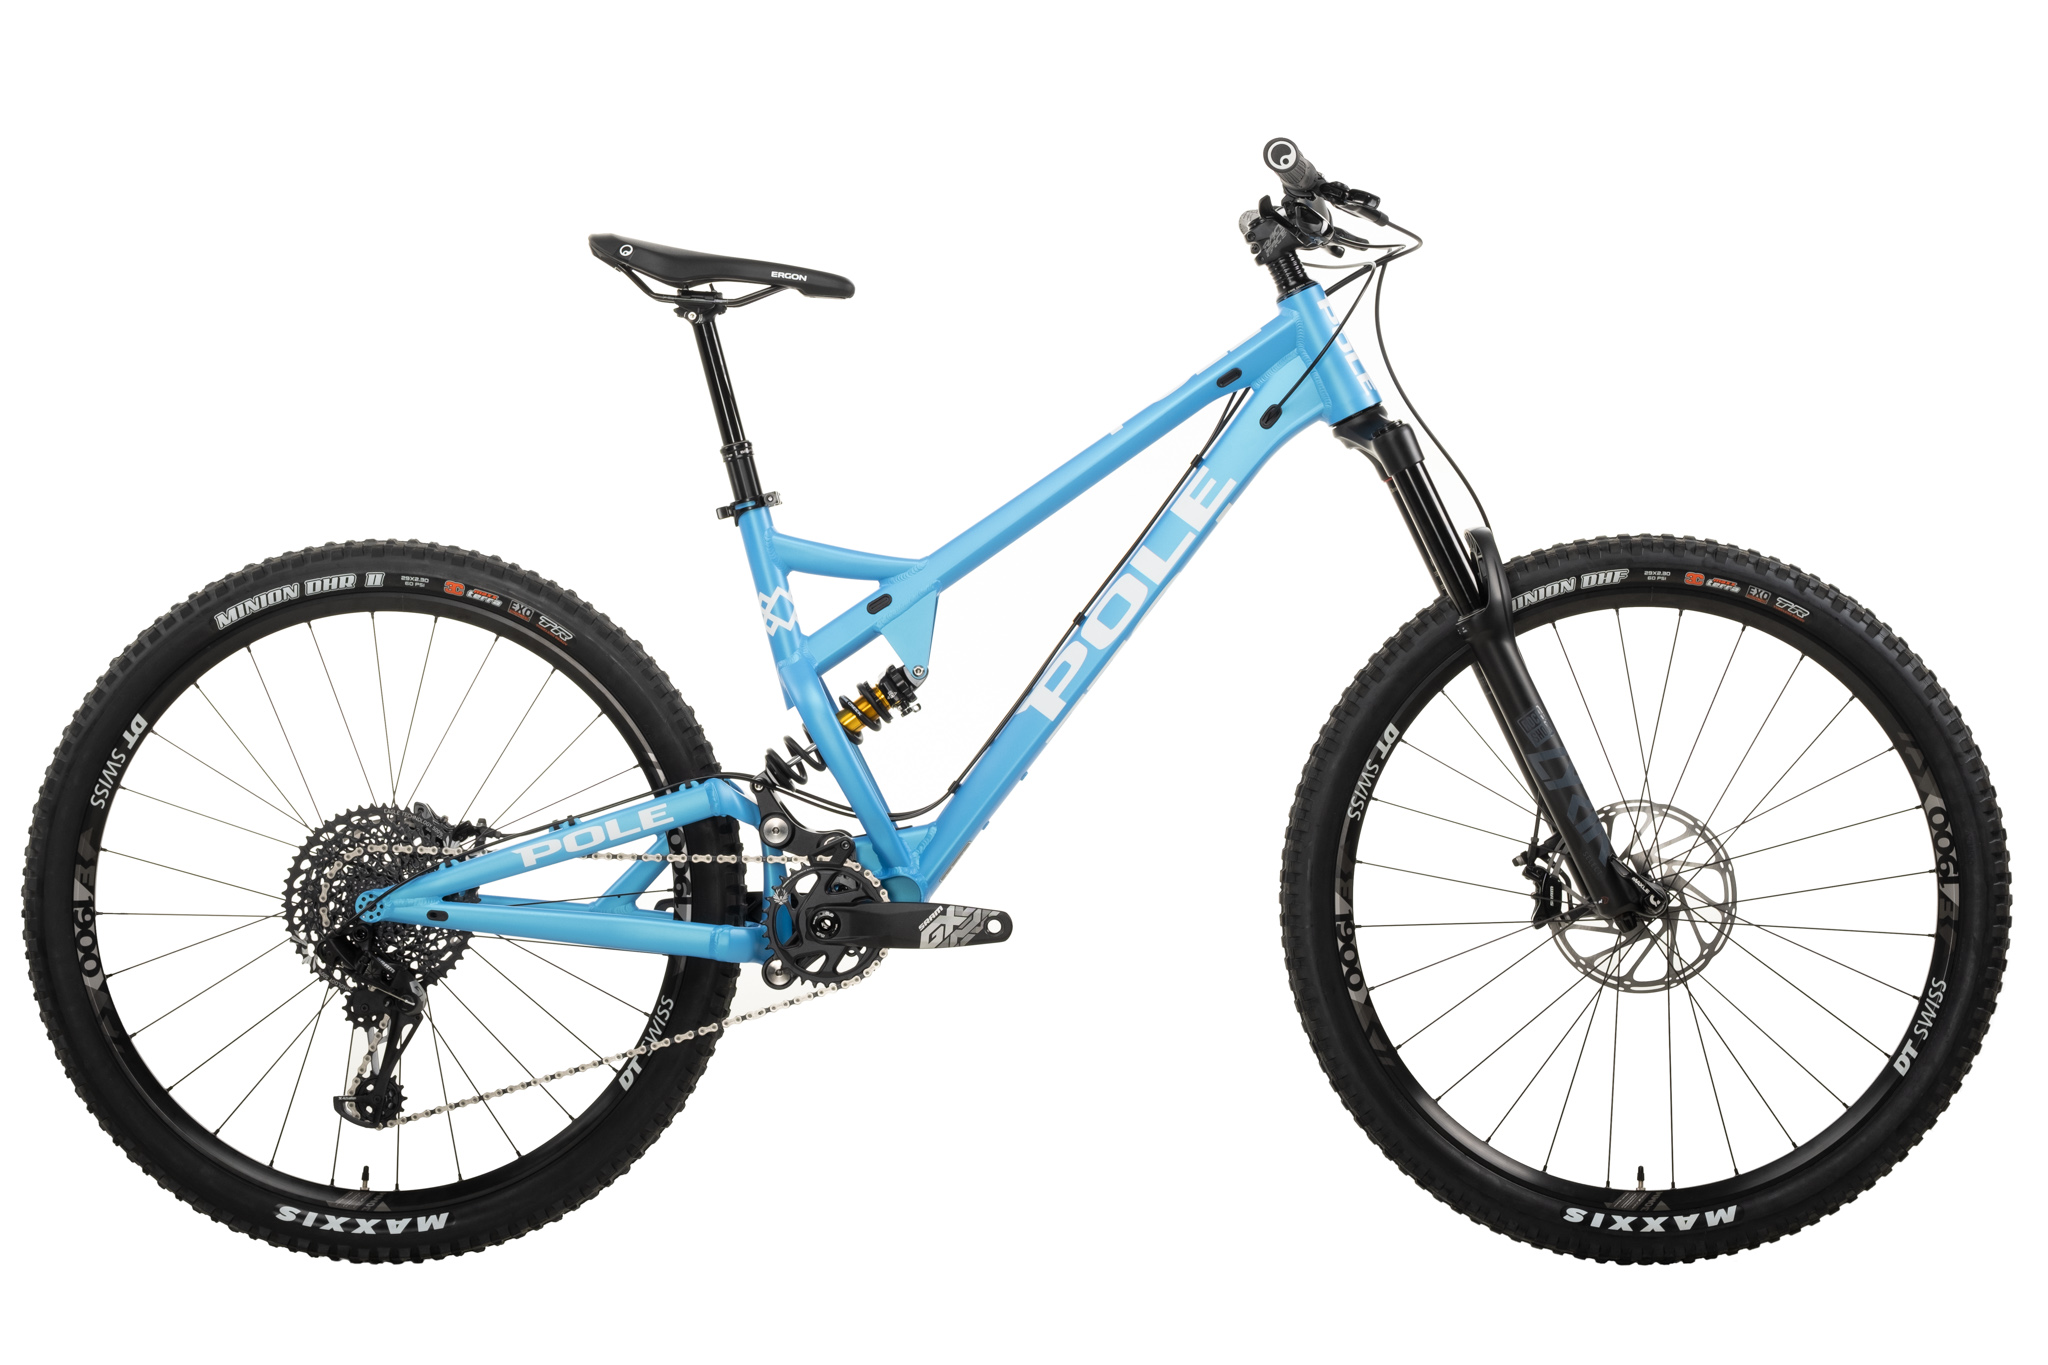 Pole EVOLINK 140 RT full-suspension mountainbike from the side, Polar Blue color